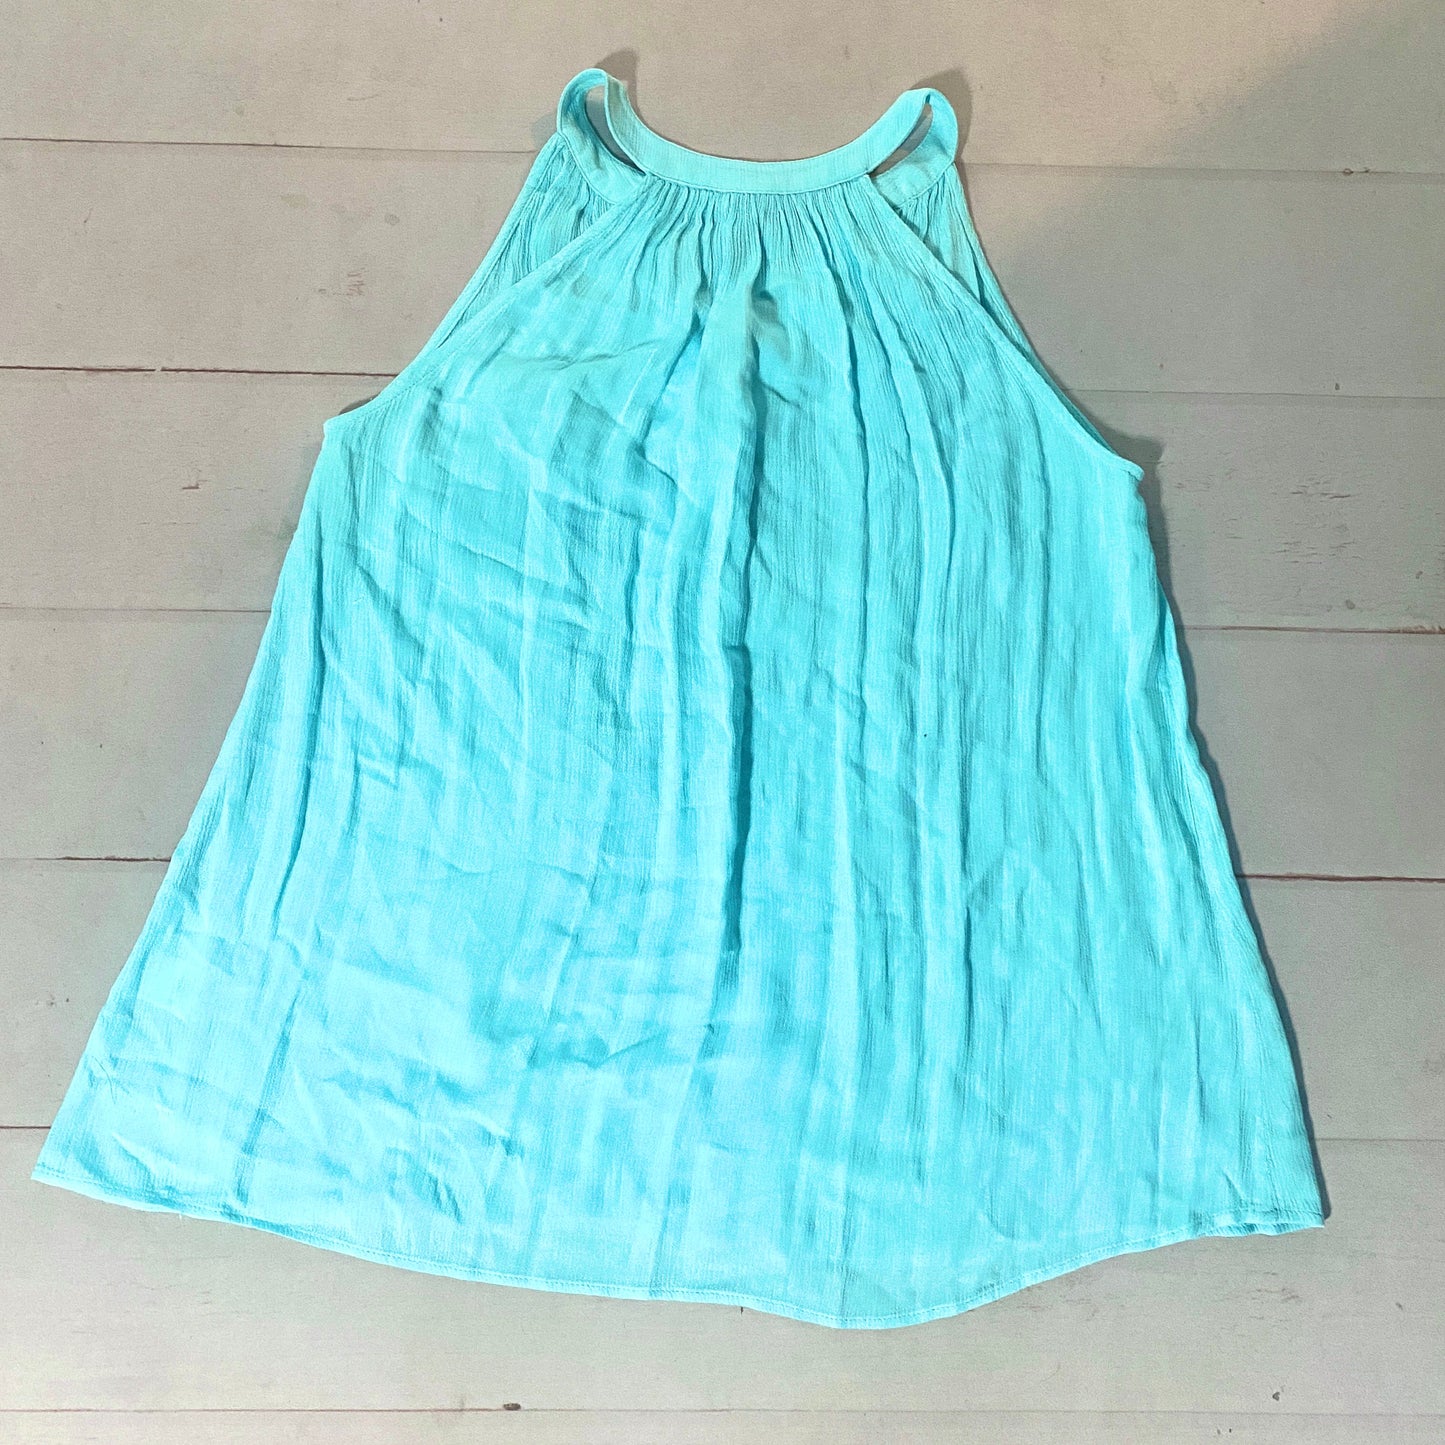 Top Sleeveless By Lilly Pulitzer  Size: Xs